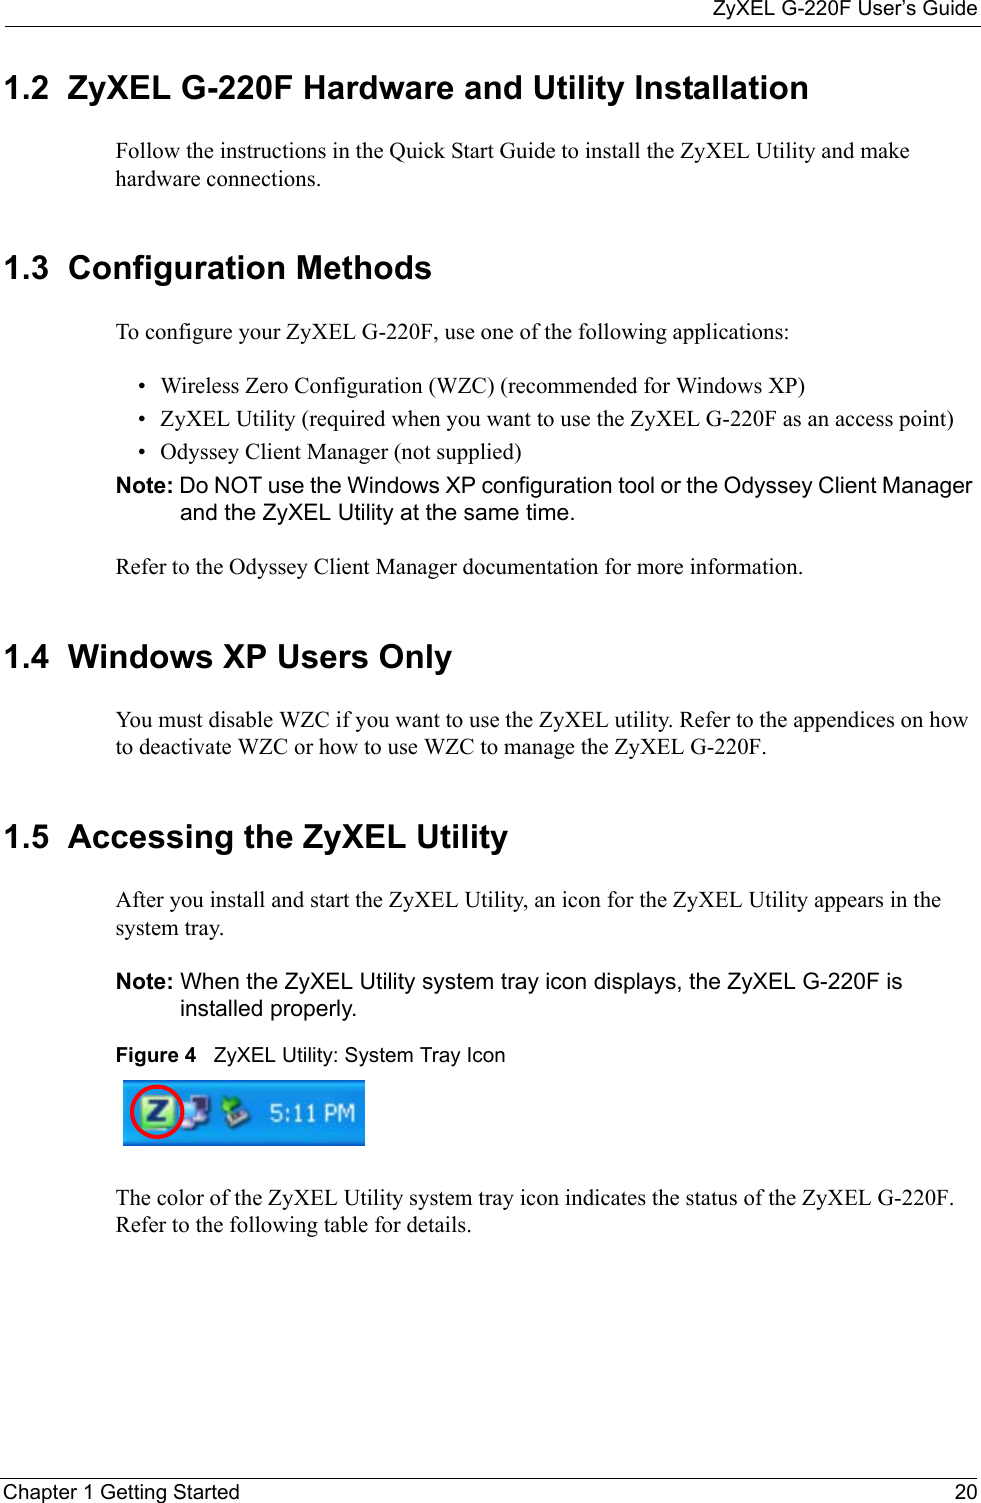 ZyXEL G-220F User’s GuideChapter 1 Getting Started 201.2  ZyXEL G-220F Hardware and Utility InstallationFollow the instructions in the Quick Start Guide to install the ZyXEL Utility and make hardware connections.1.3  Configuration Methods   To configure your ZyXEL G-220F, use one of the following applications:• Wireless Zero Configuration (WZC) (recommended for Windows XP)• ZyXEL Utility (required when you want to use the ZyXEL G-220F as an access point)• Odyssey Client Manager (not supplied) Note: Do NOT use the Windows XP configuration tool or the Odyssey Client Manager and the ZyXEL Utility at the same time.Refer to the Odyssey Client Manager documentation for more information.1.4  Windows XP Users Only You must disable WZC if you want to use the ZyXEL utility. Refer to the appendices on how to deactivate WZC or how to use WZC to manage the ZyXEL G-220F.1.5  Accessing the ZyXEL Utility After you install and start the ZyXEL Utility, an icon for the ZyXEL Utility appears in the system tray.Note: When the ZyXEL Utility system tray icon displays, the ZyXEL G-220F is installed properly.Figure 4   ZyXEL Utility: System Tray Icon The color of the ZyXEL Utility system tray icon indicates the status of the ZyXEL G-220F. Refer to the following table for details.